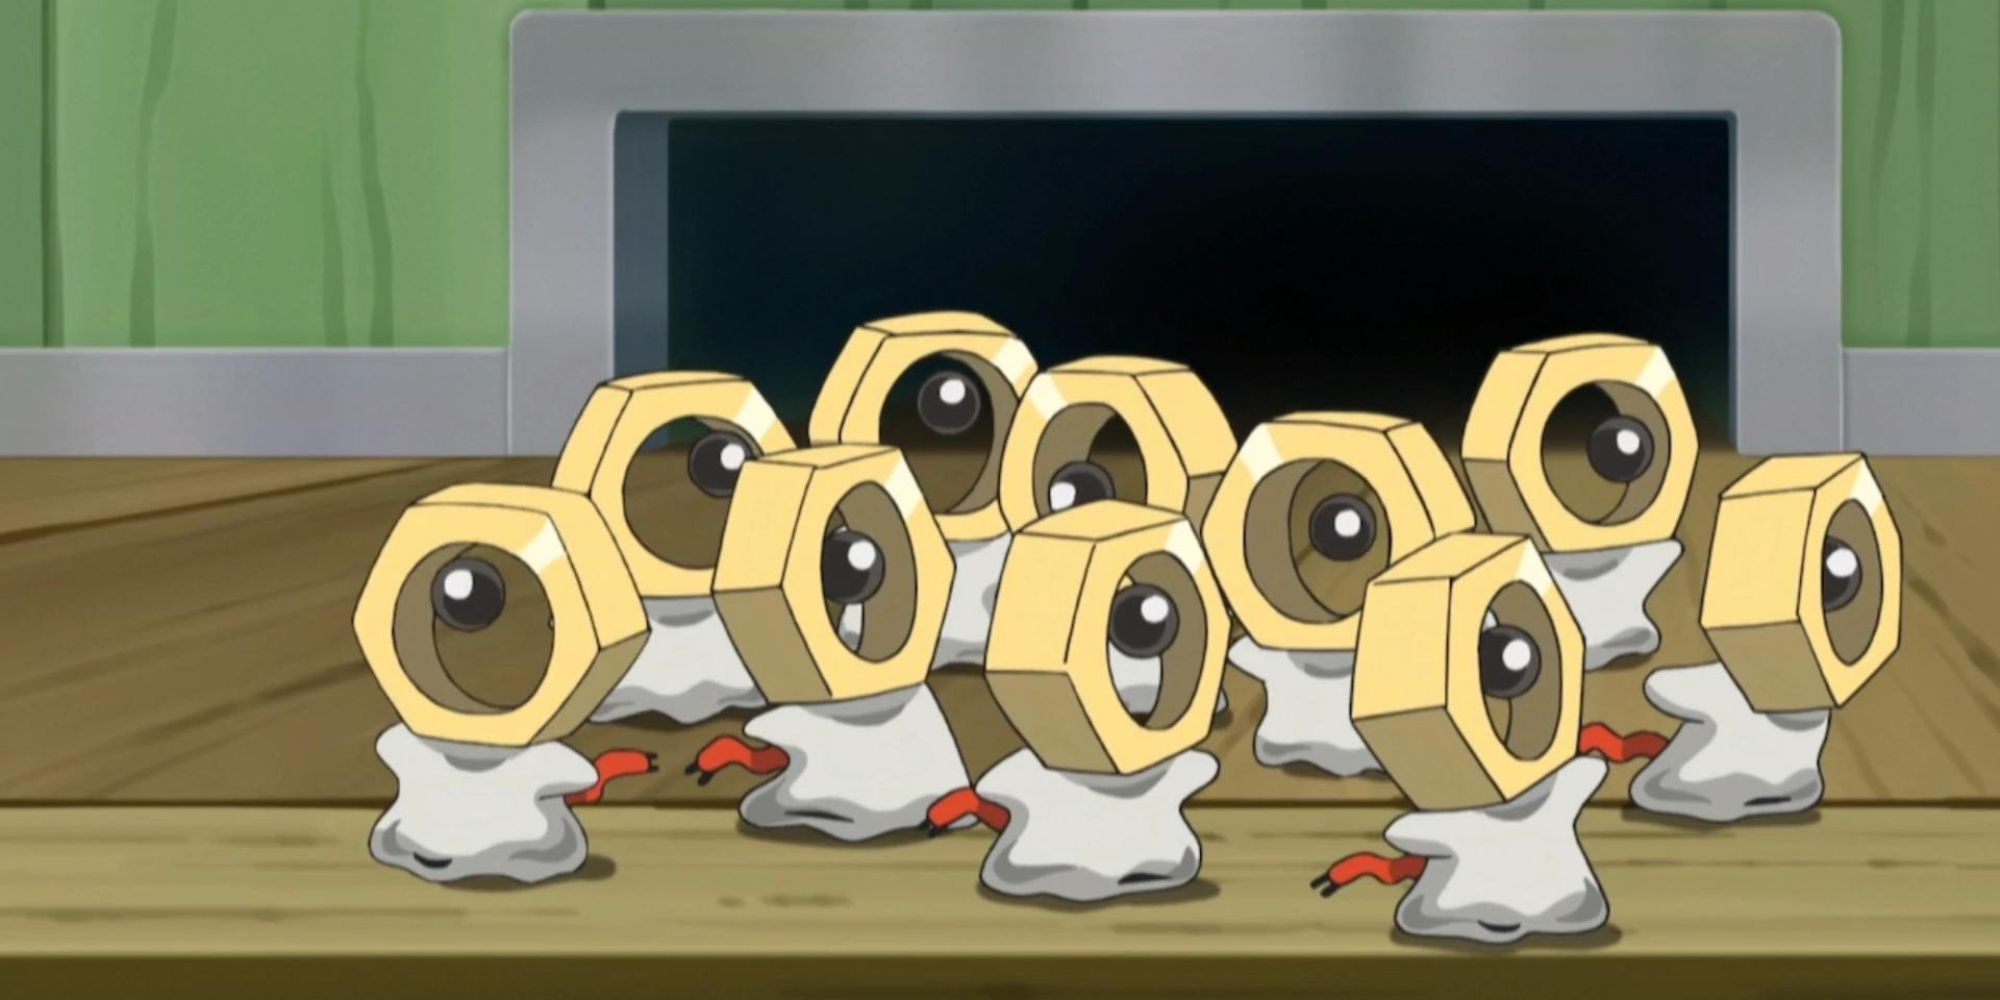 A group of Meltan emerge from a hole in the wall